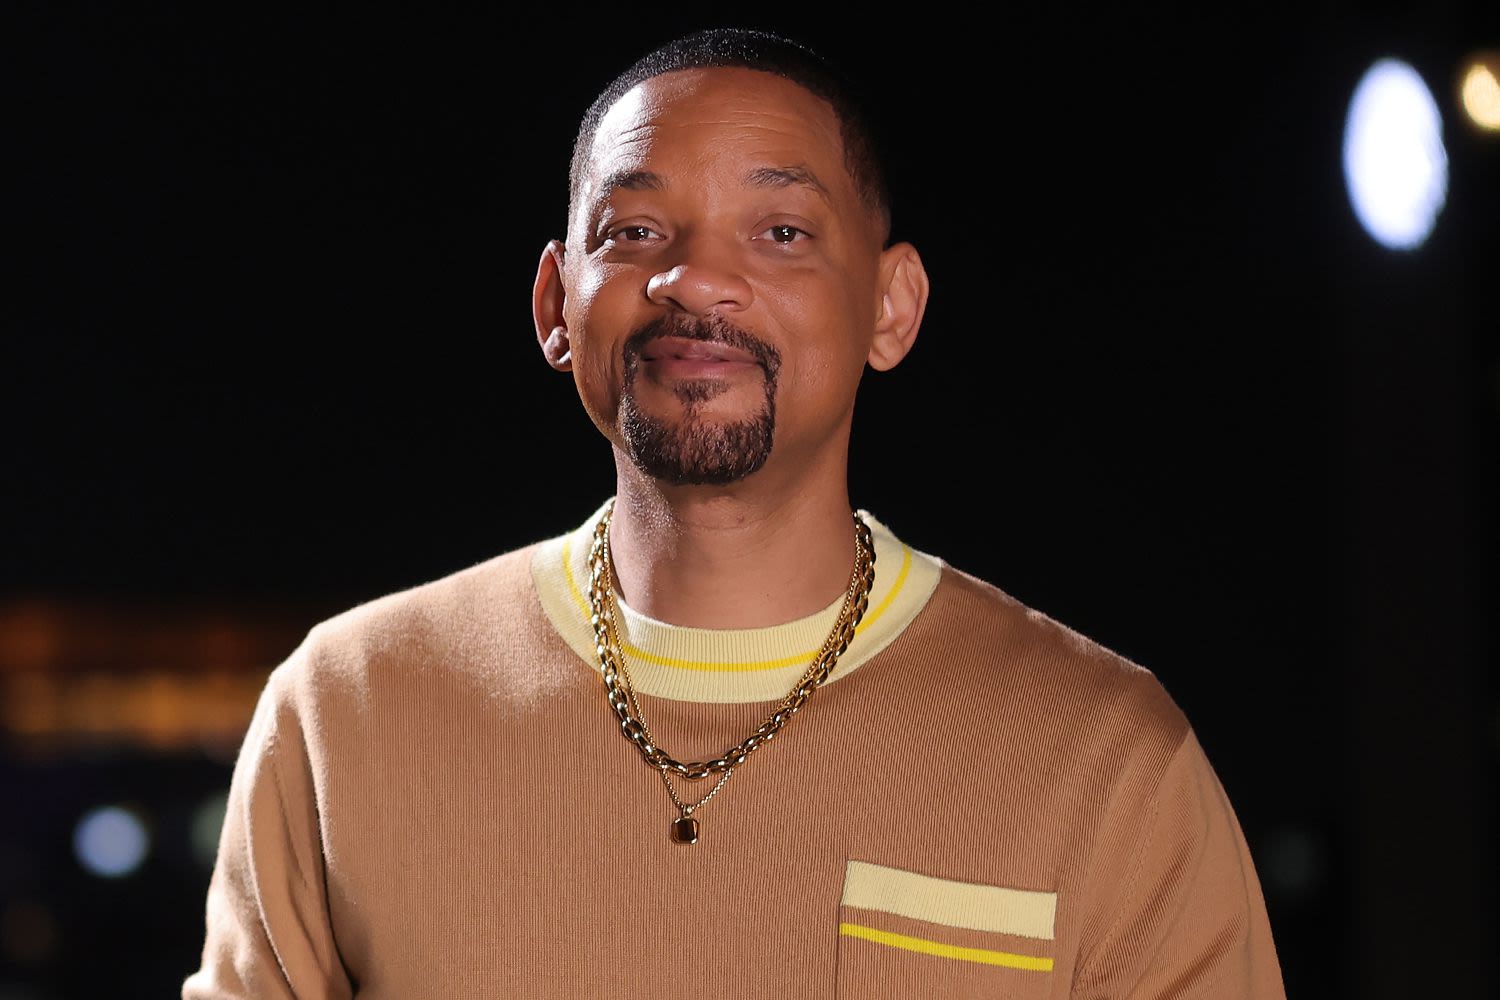 Will Smith Says He Can Cultivate a ‘Joyful Spirit’ with ‘No Women, No Drugs’ and ‘No Money'